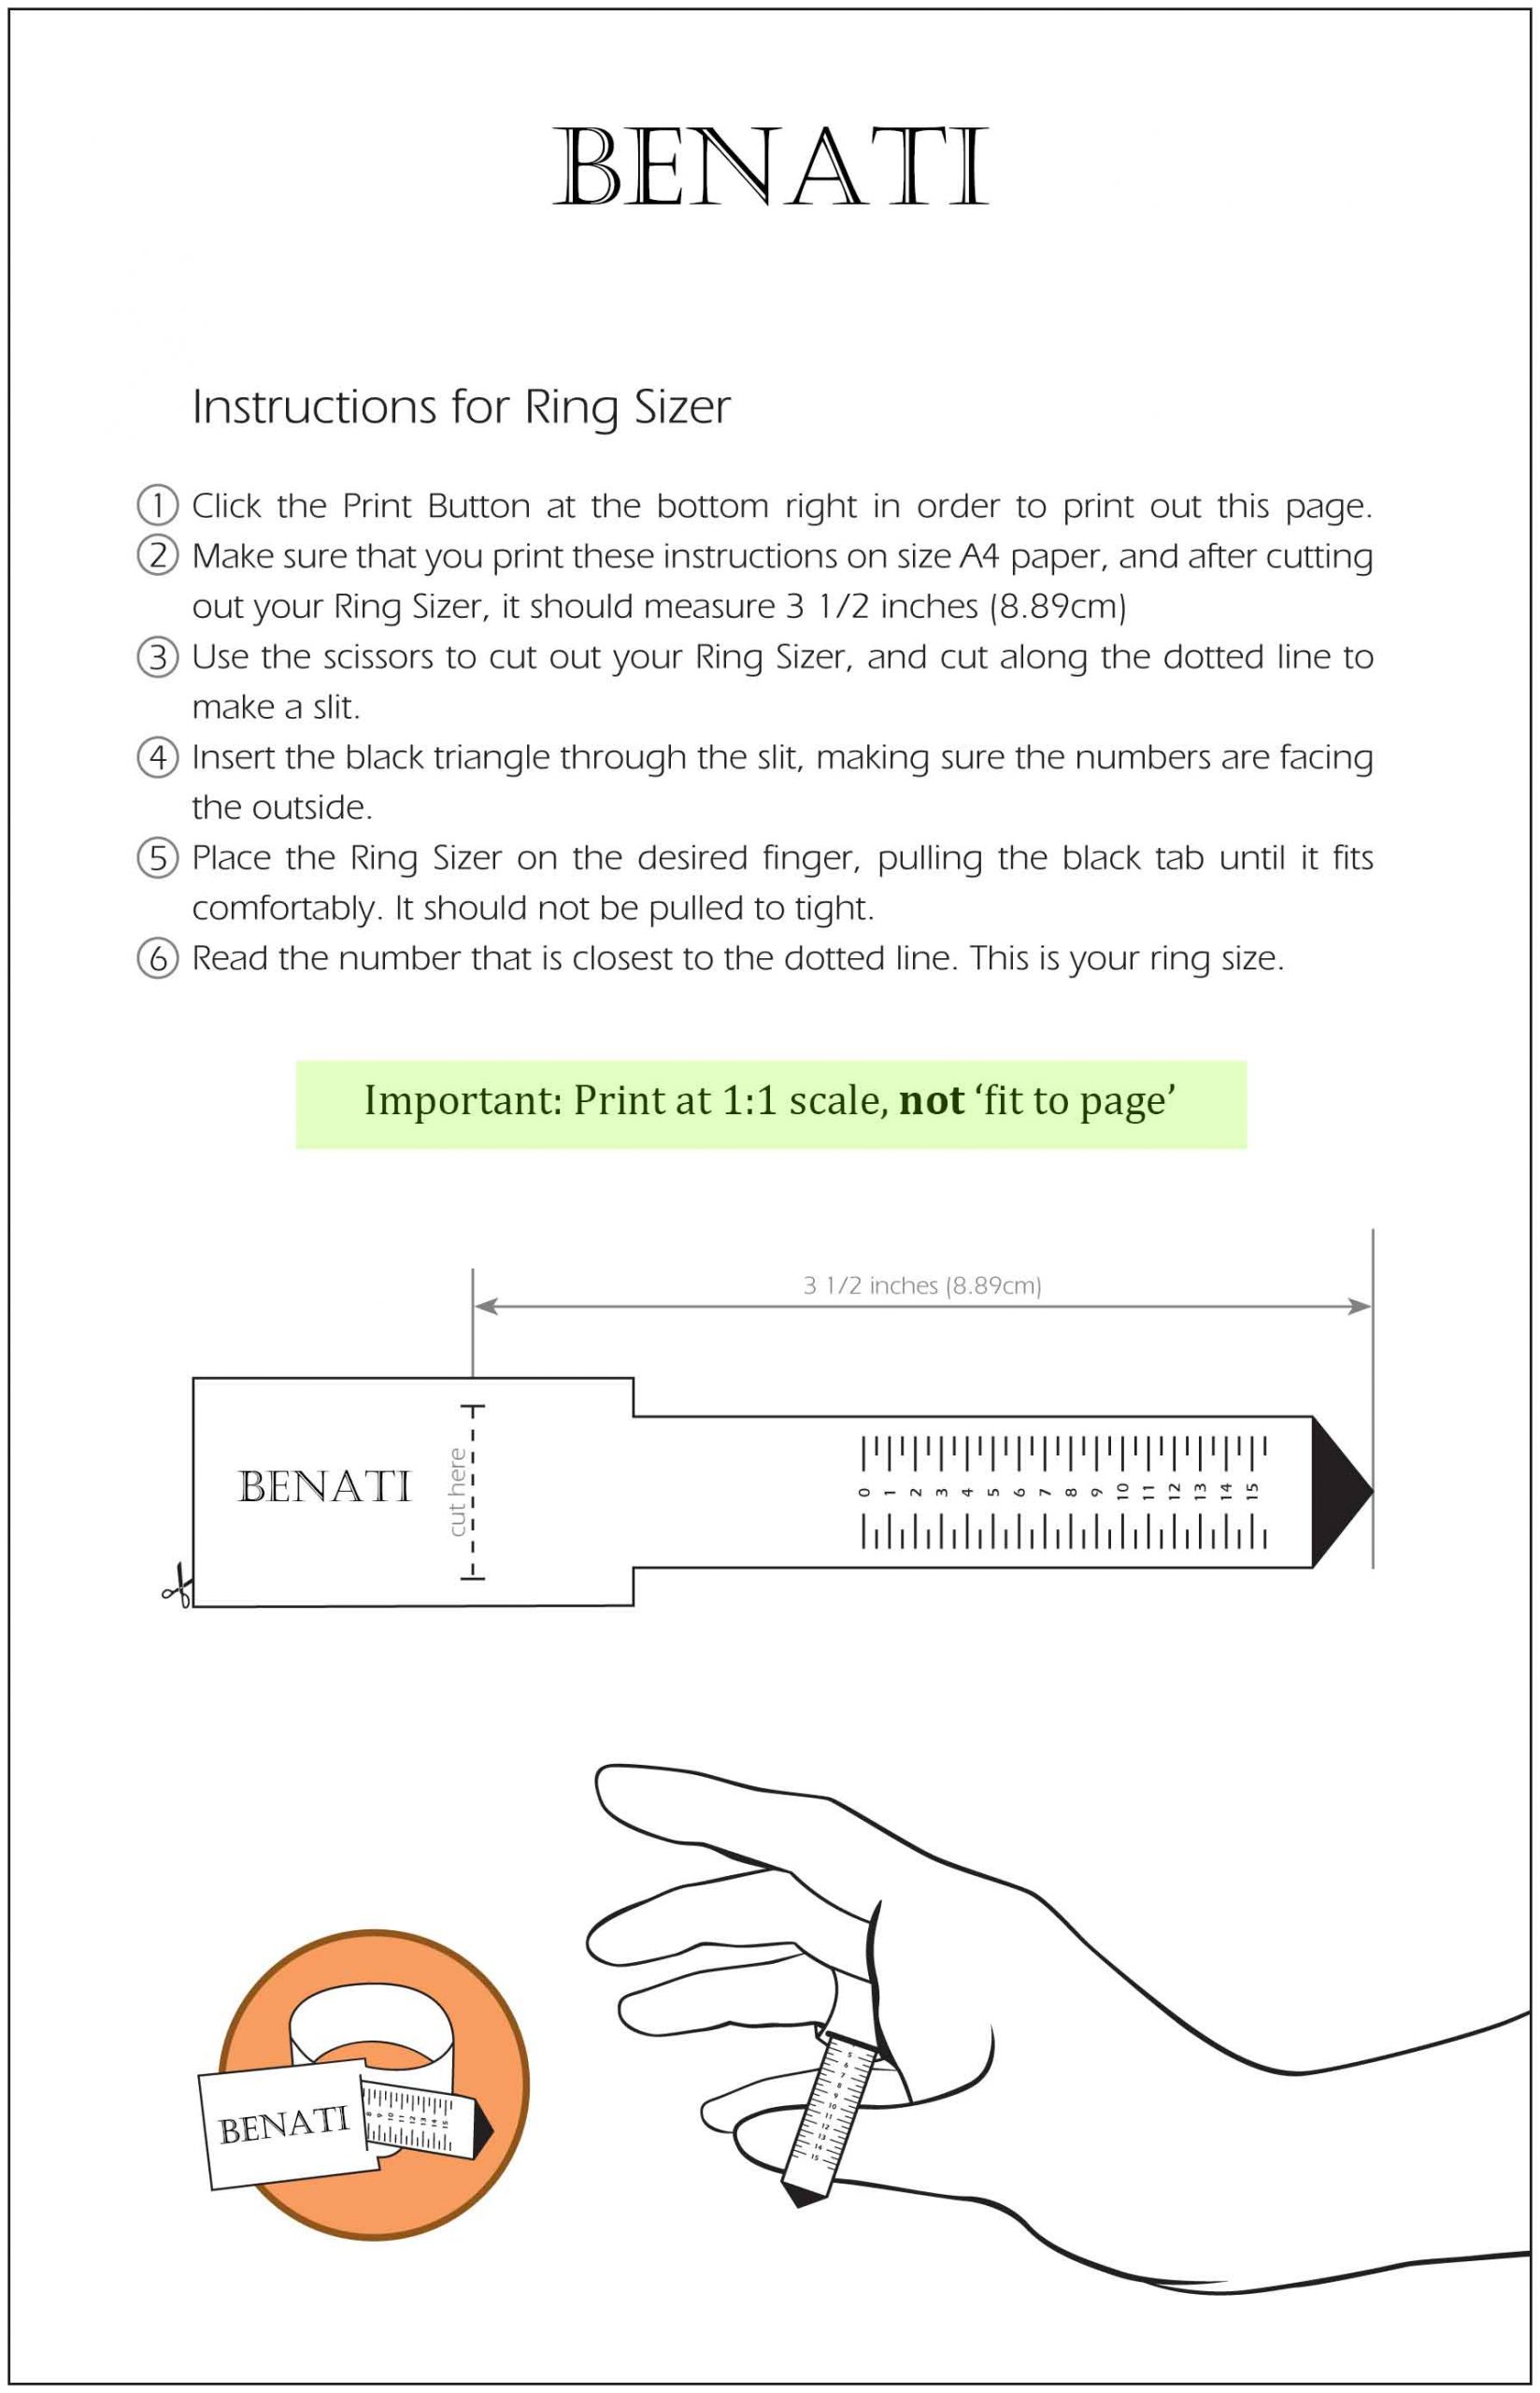 100% accurate ring sizer printable